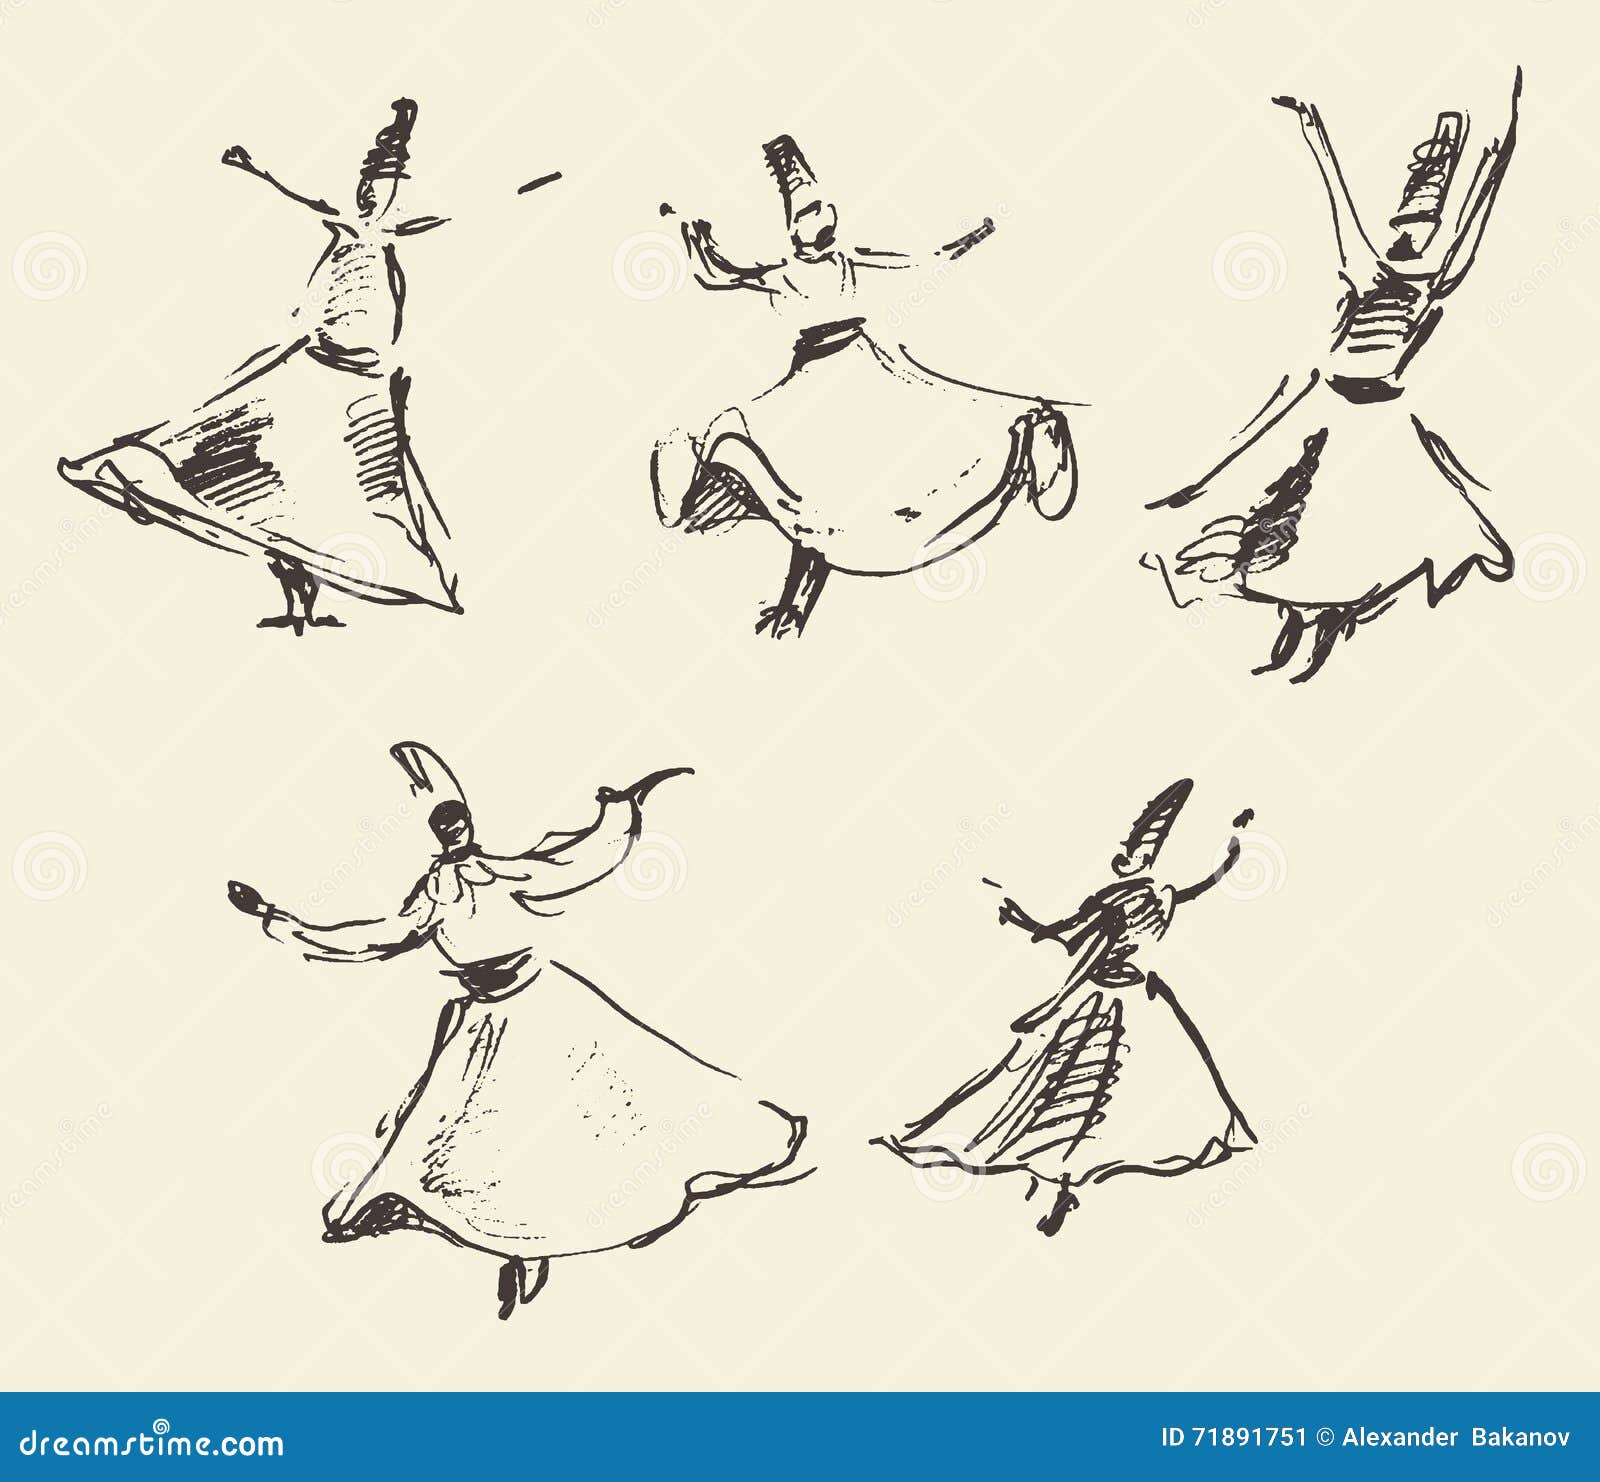 whirling dervishes mevlana sufi hand drawn sketch